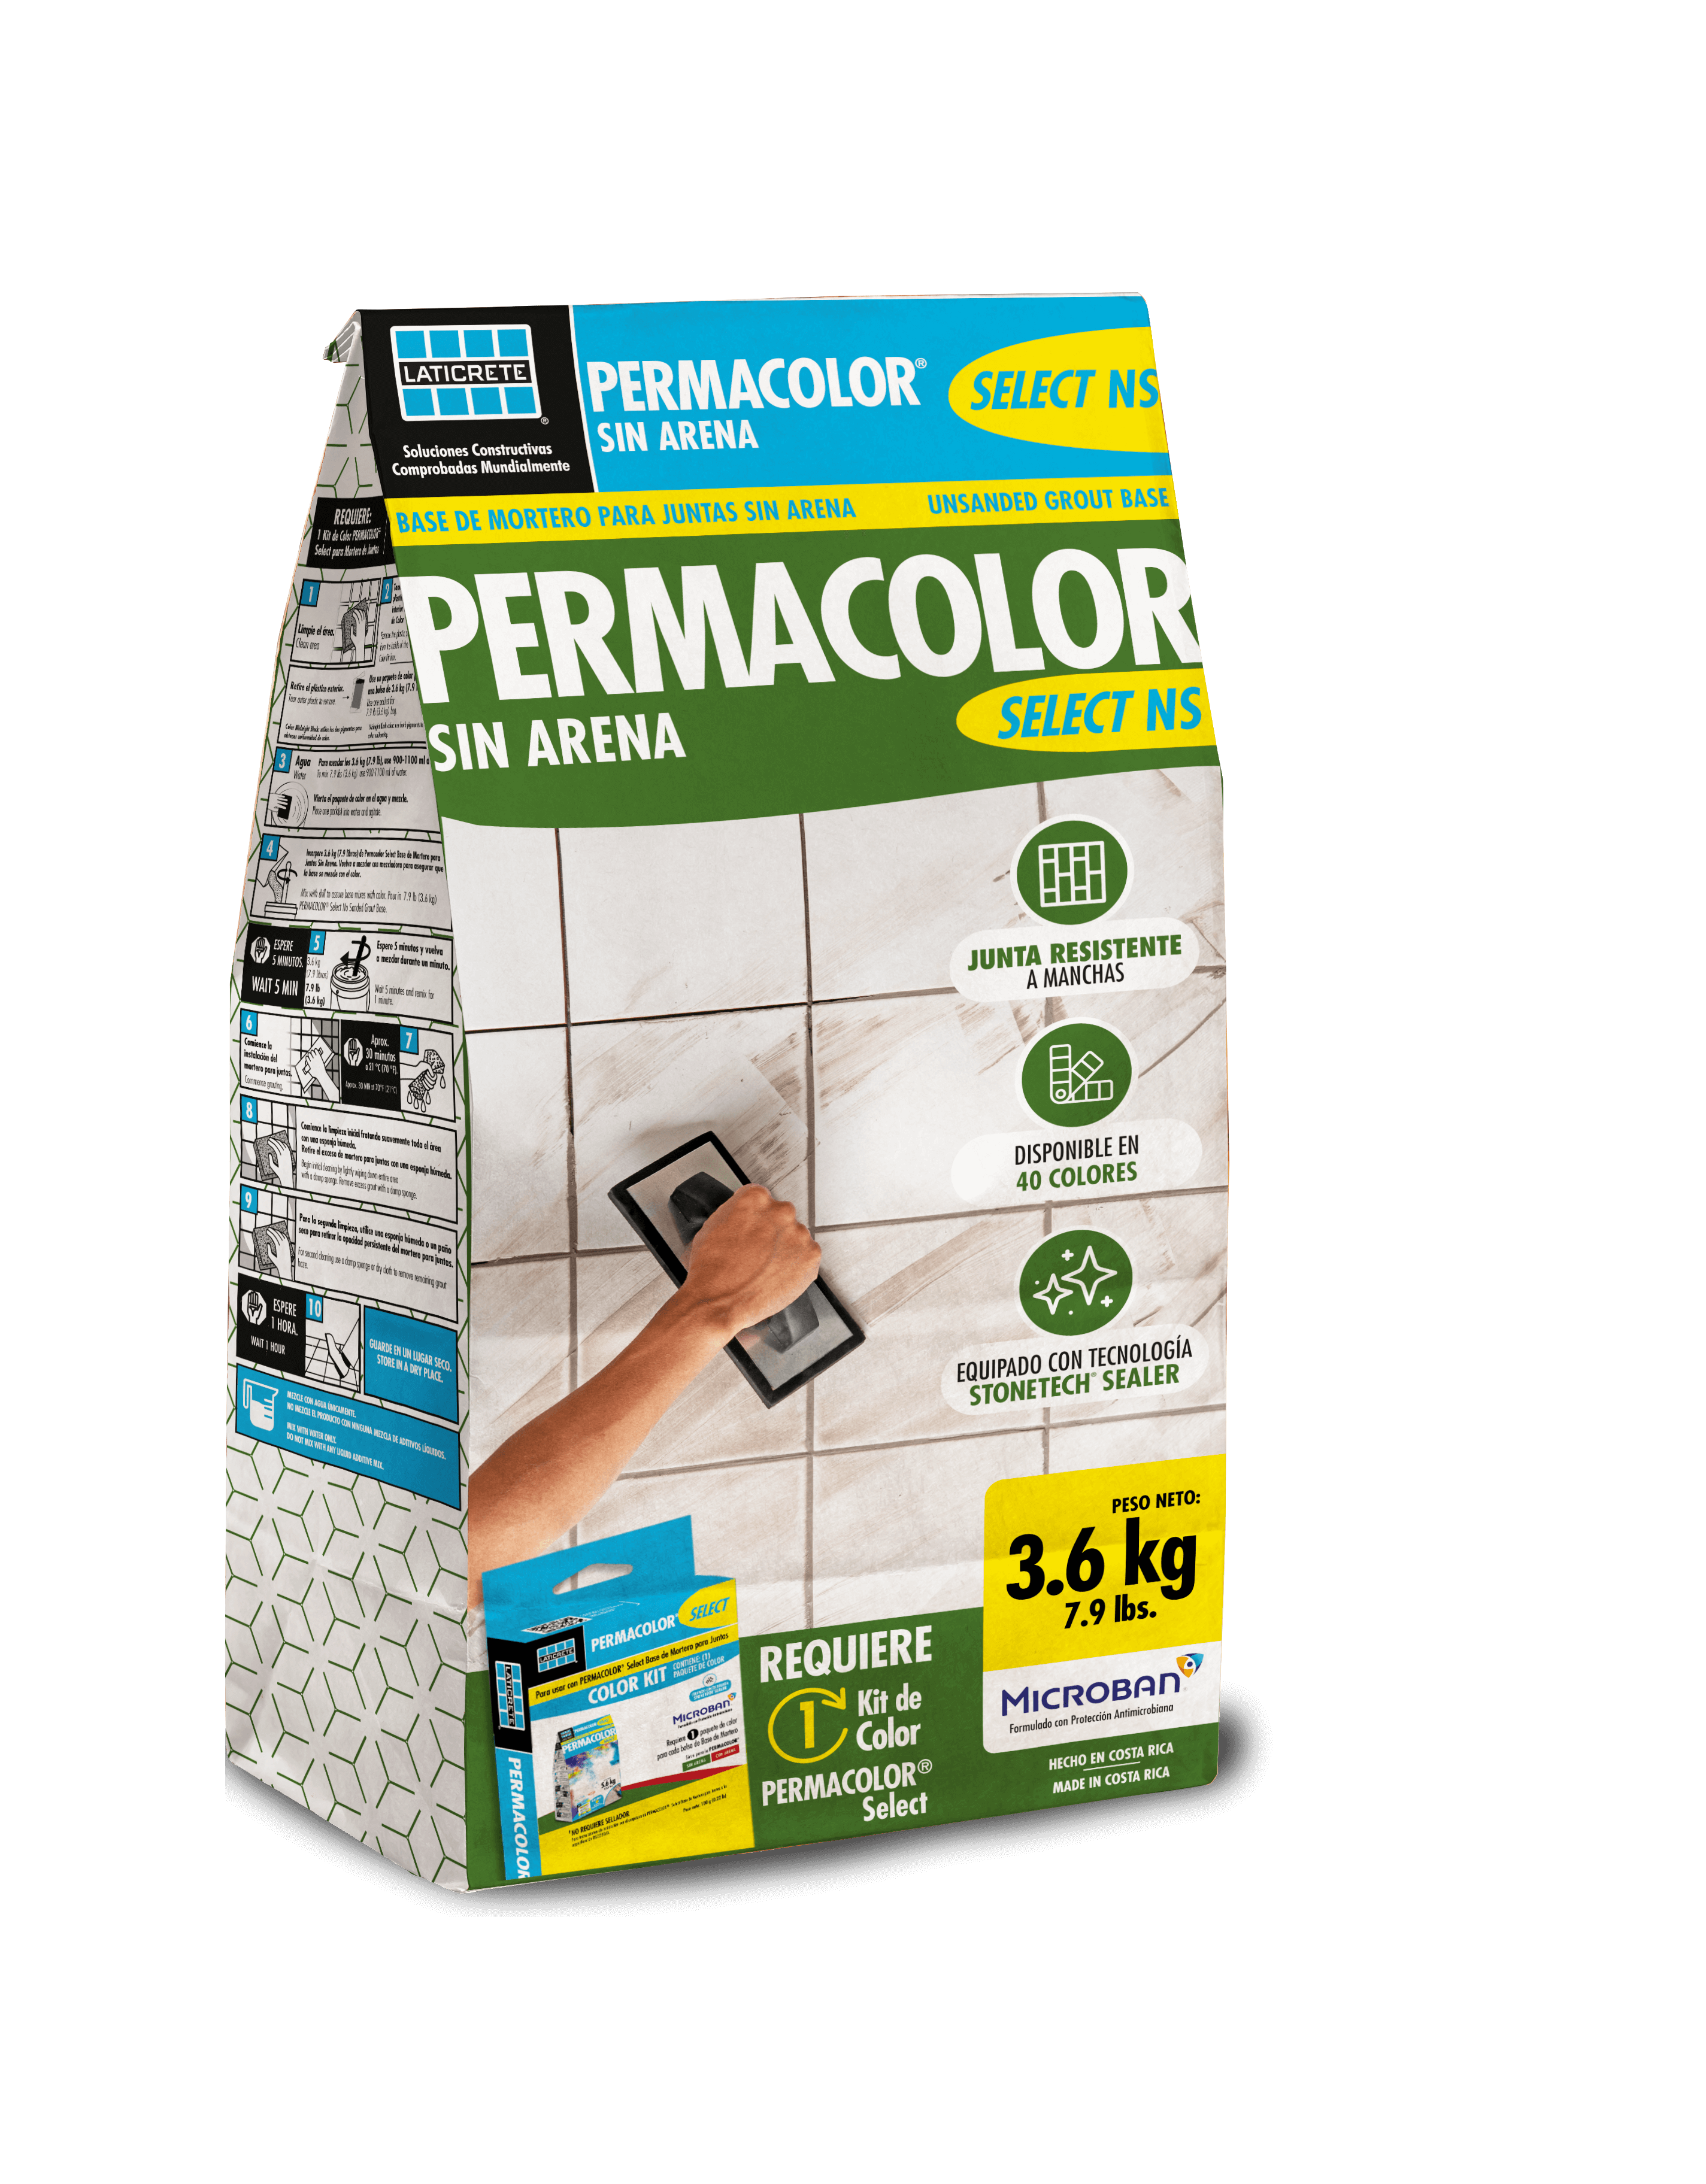 PERMACOLOR® Select* without sand